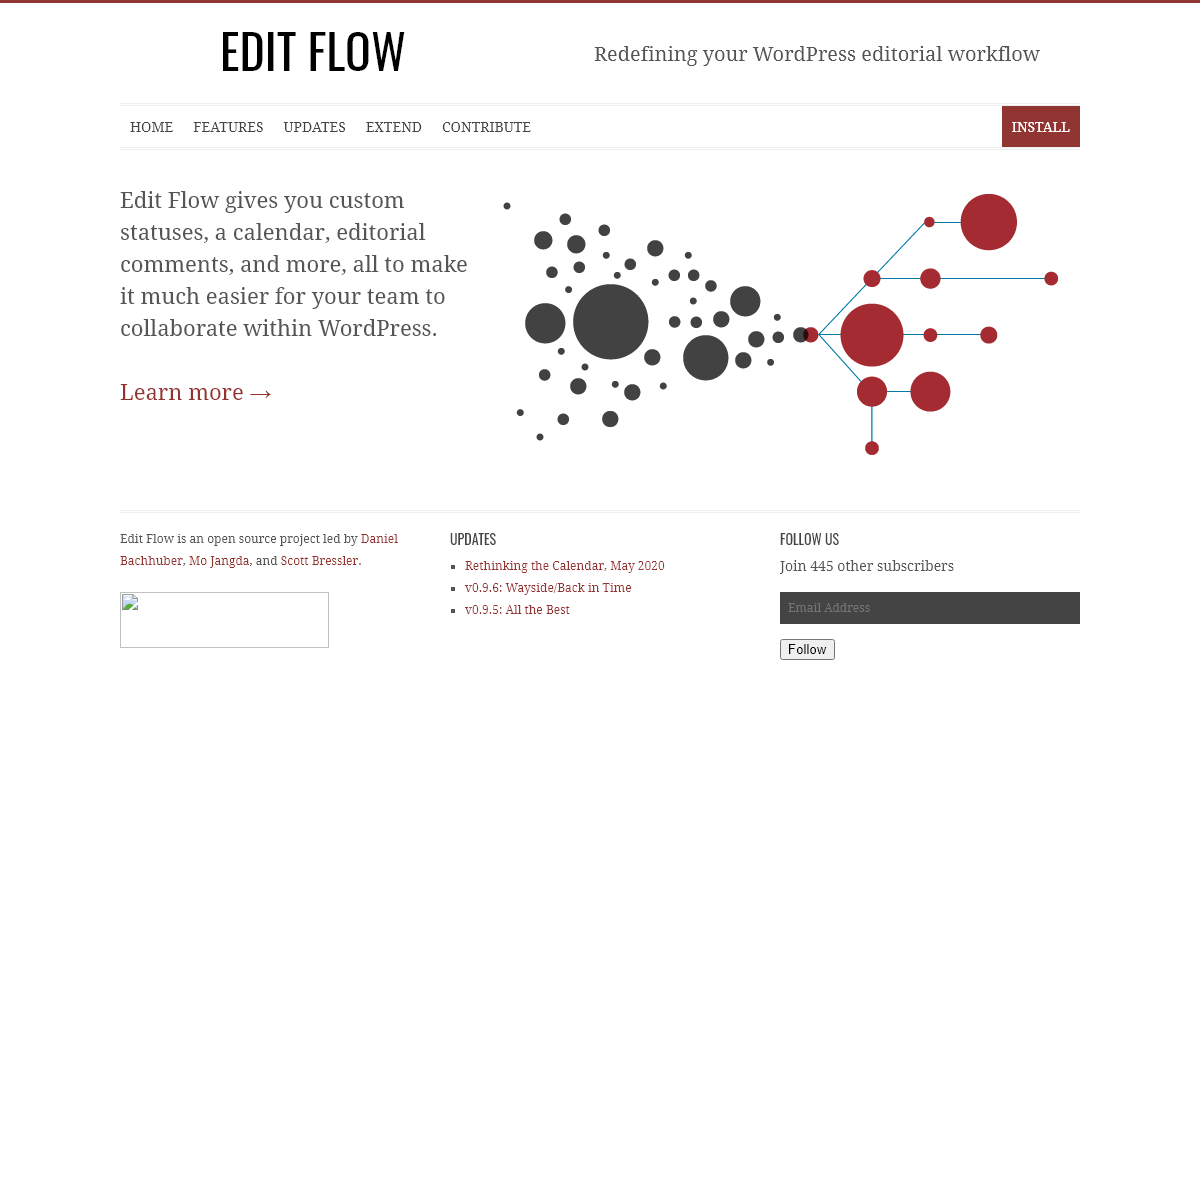 A complete backup of editflow.org